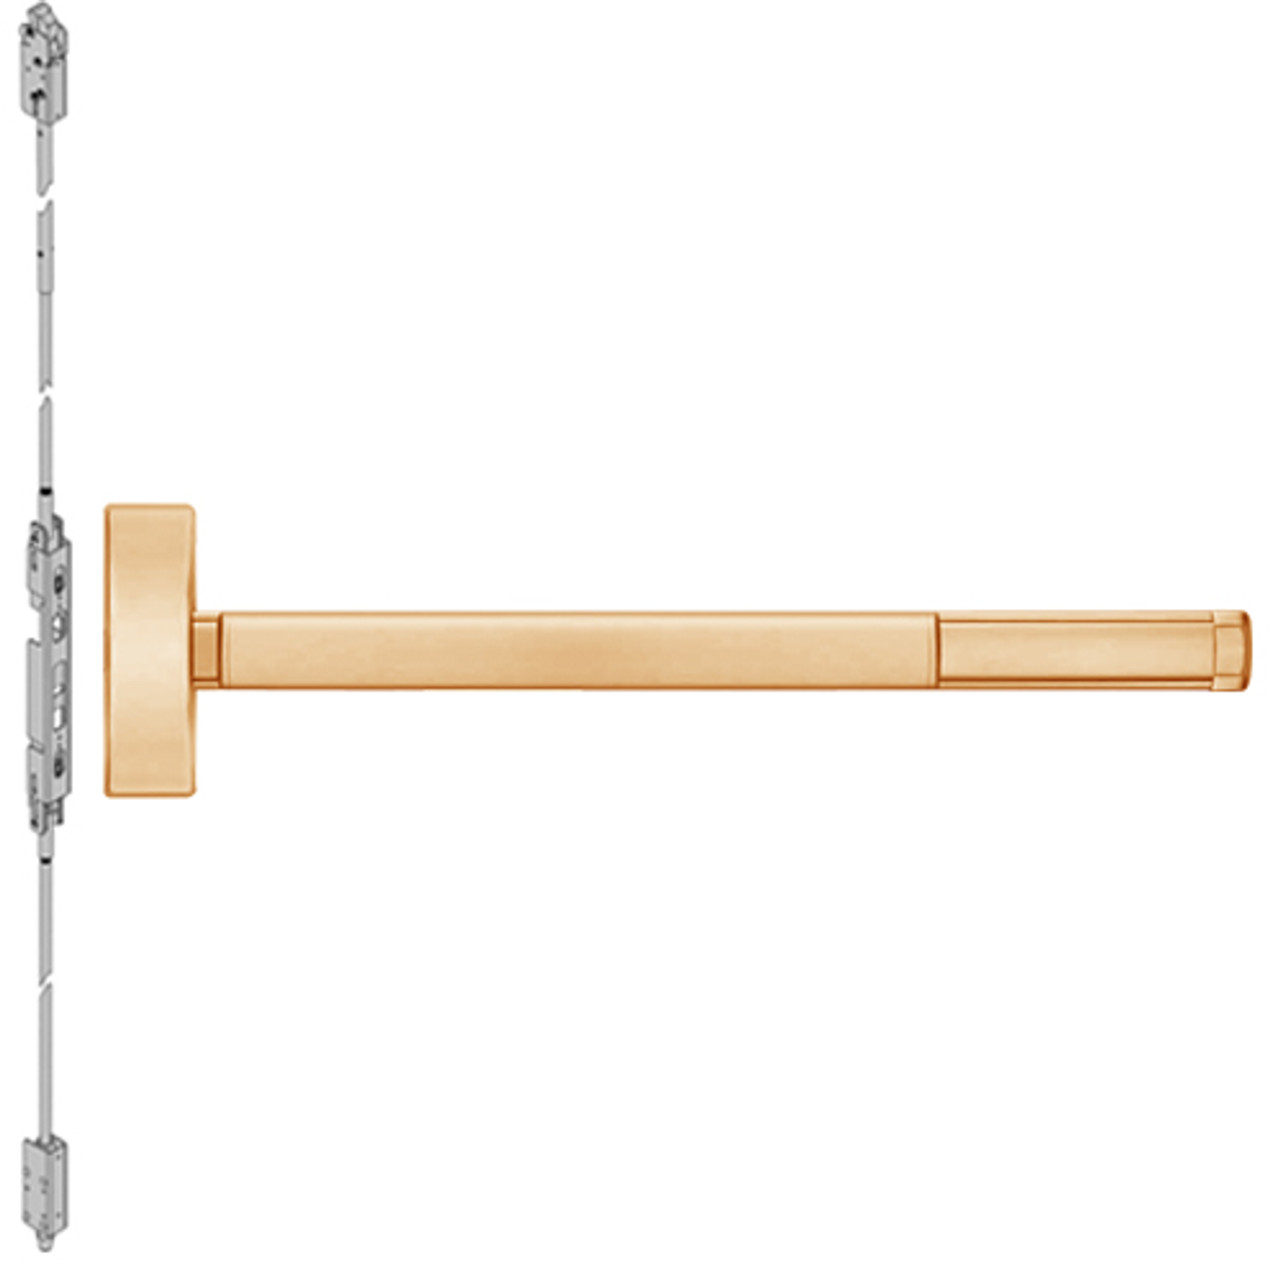 DE2803-612-48 PHI 2800 Series Concealed Vertical Rod Exit Device with Delayed Egress Prepped for Key Retracts Latchbolt in Satin Bronze Finish